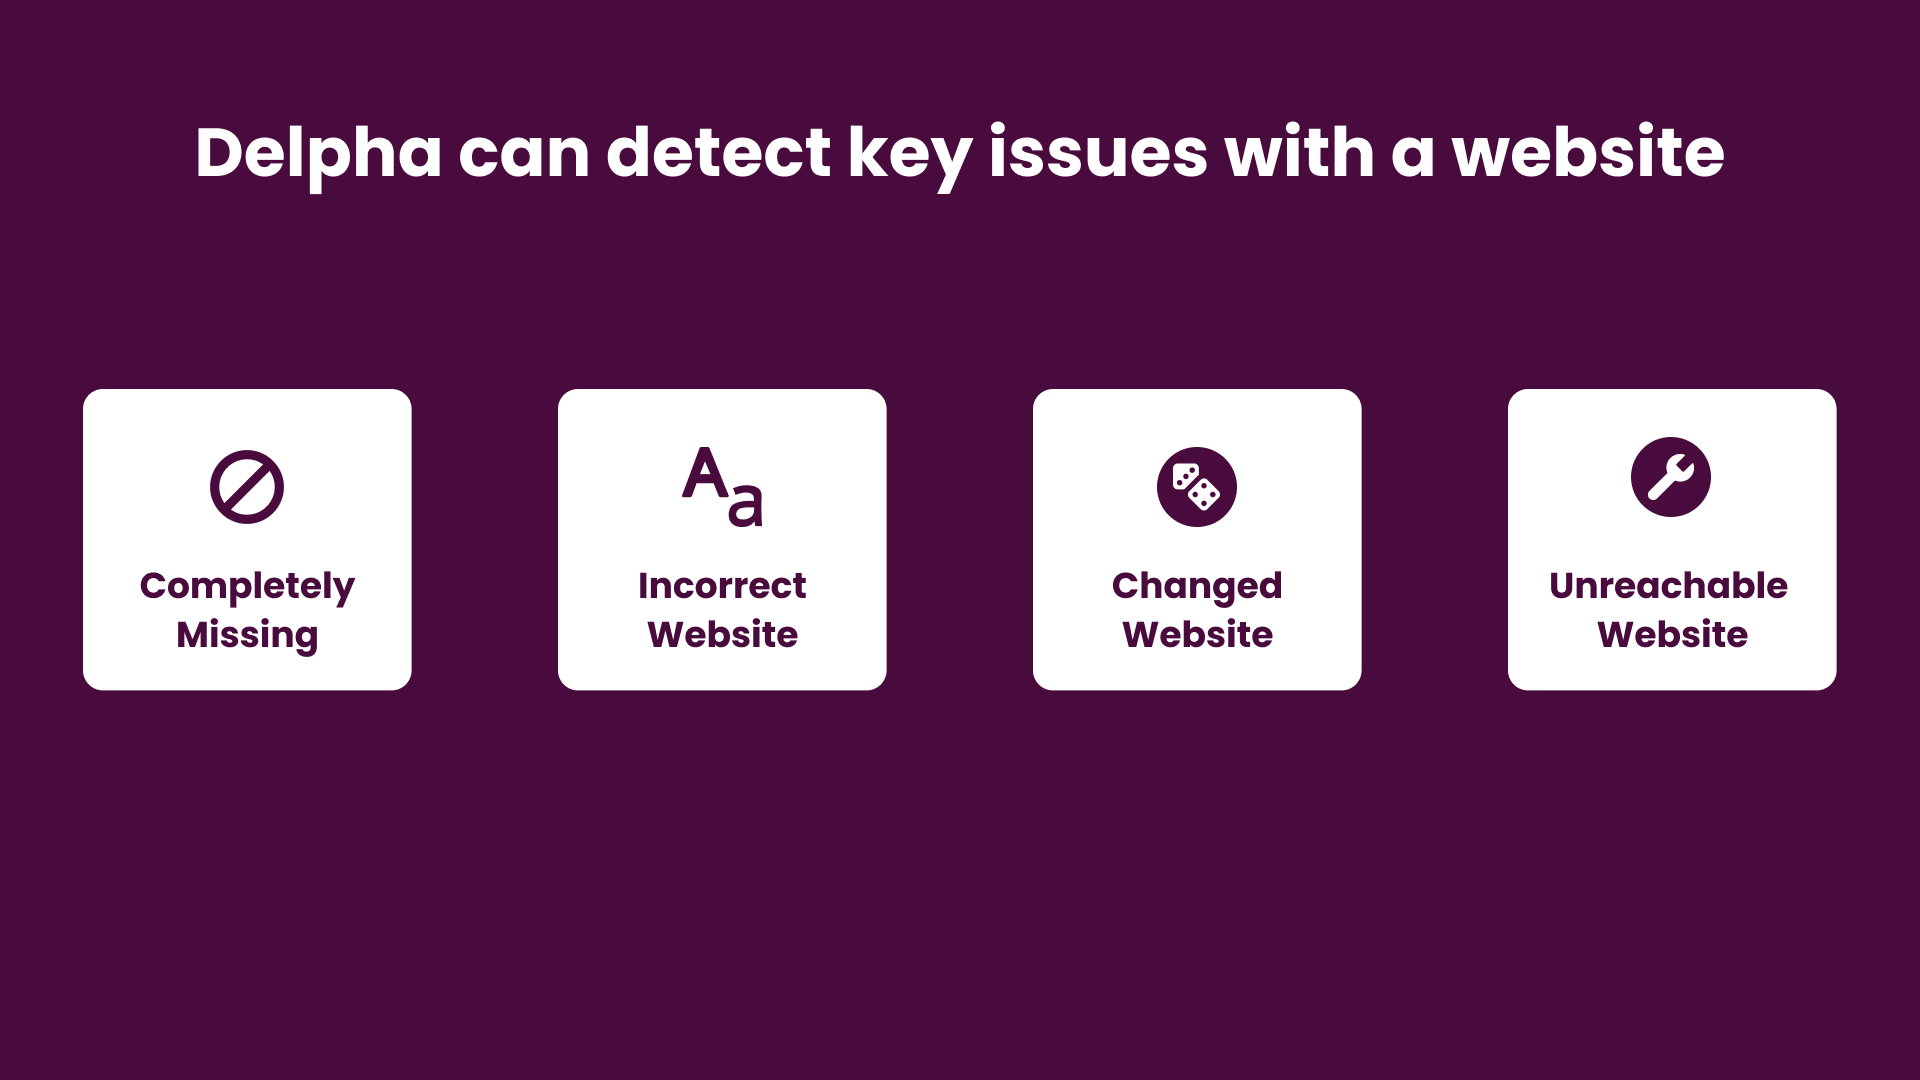 With Suggest Correct Websites, Delpha can detect when an Account’s website is missing, incorrect, changed or unreachable.